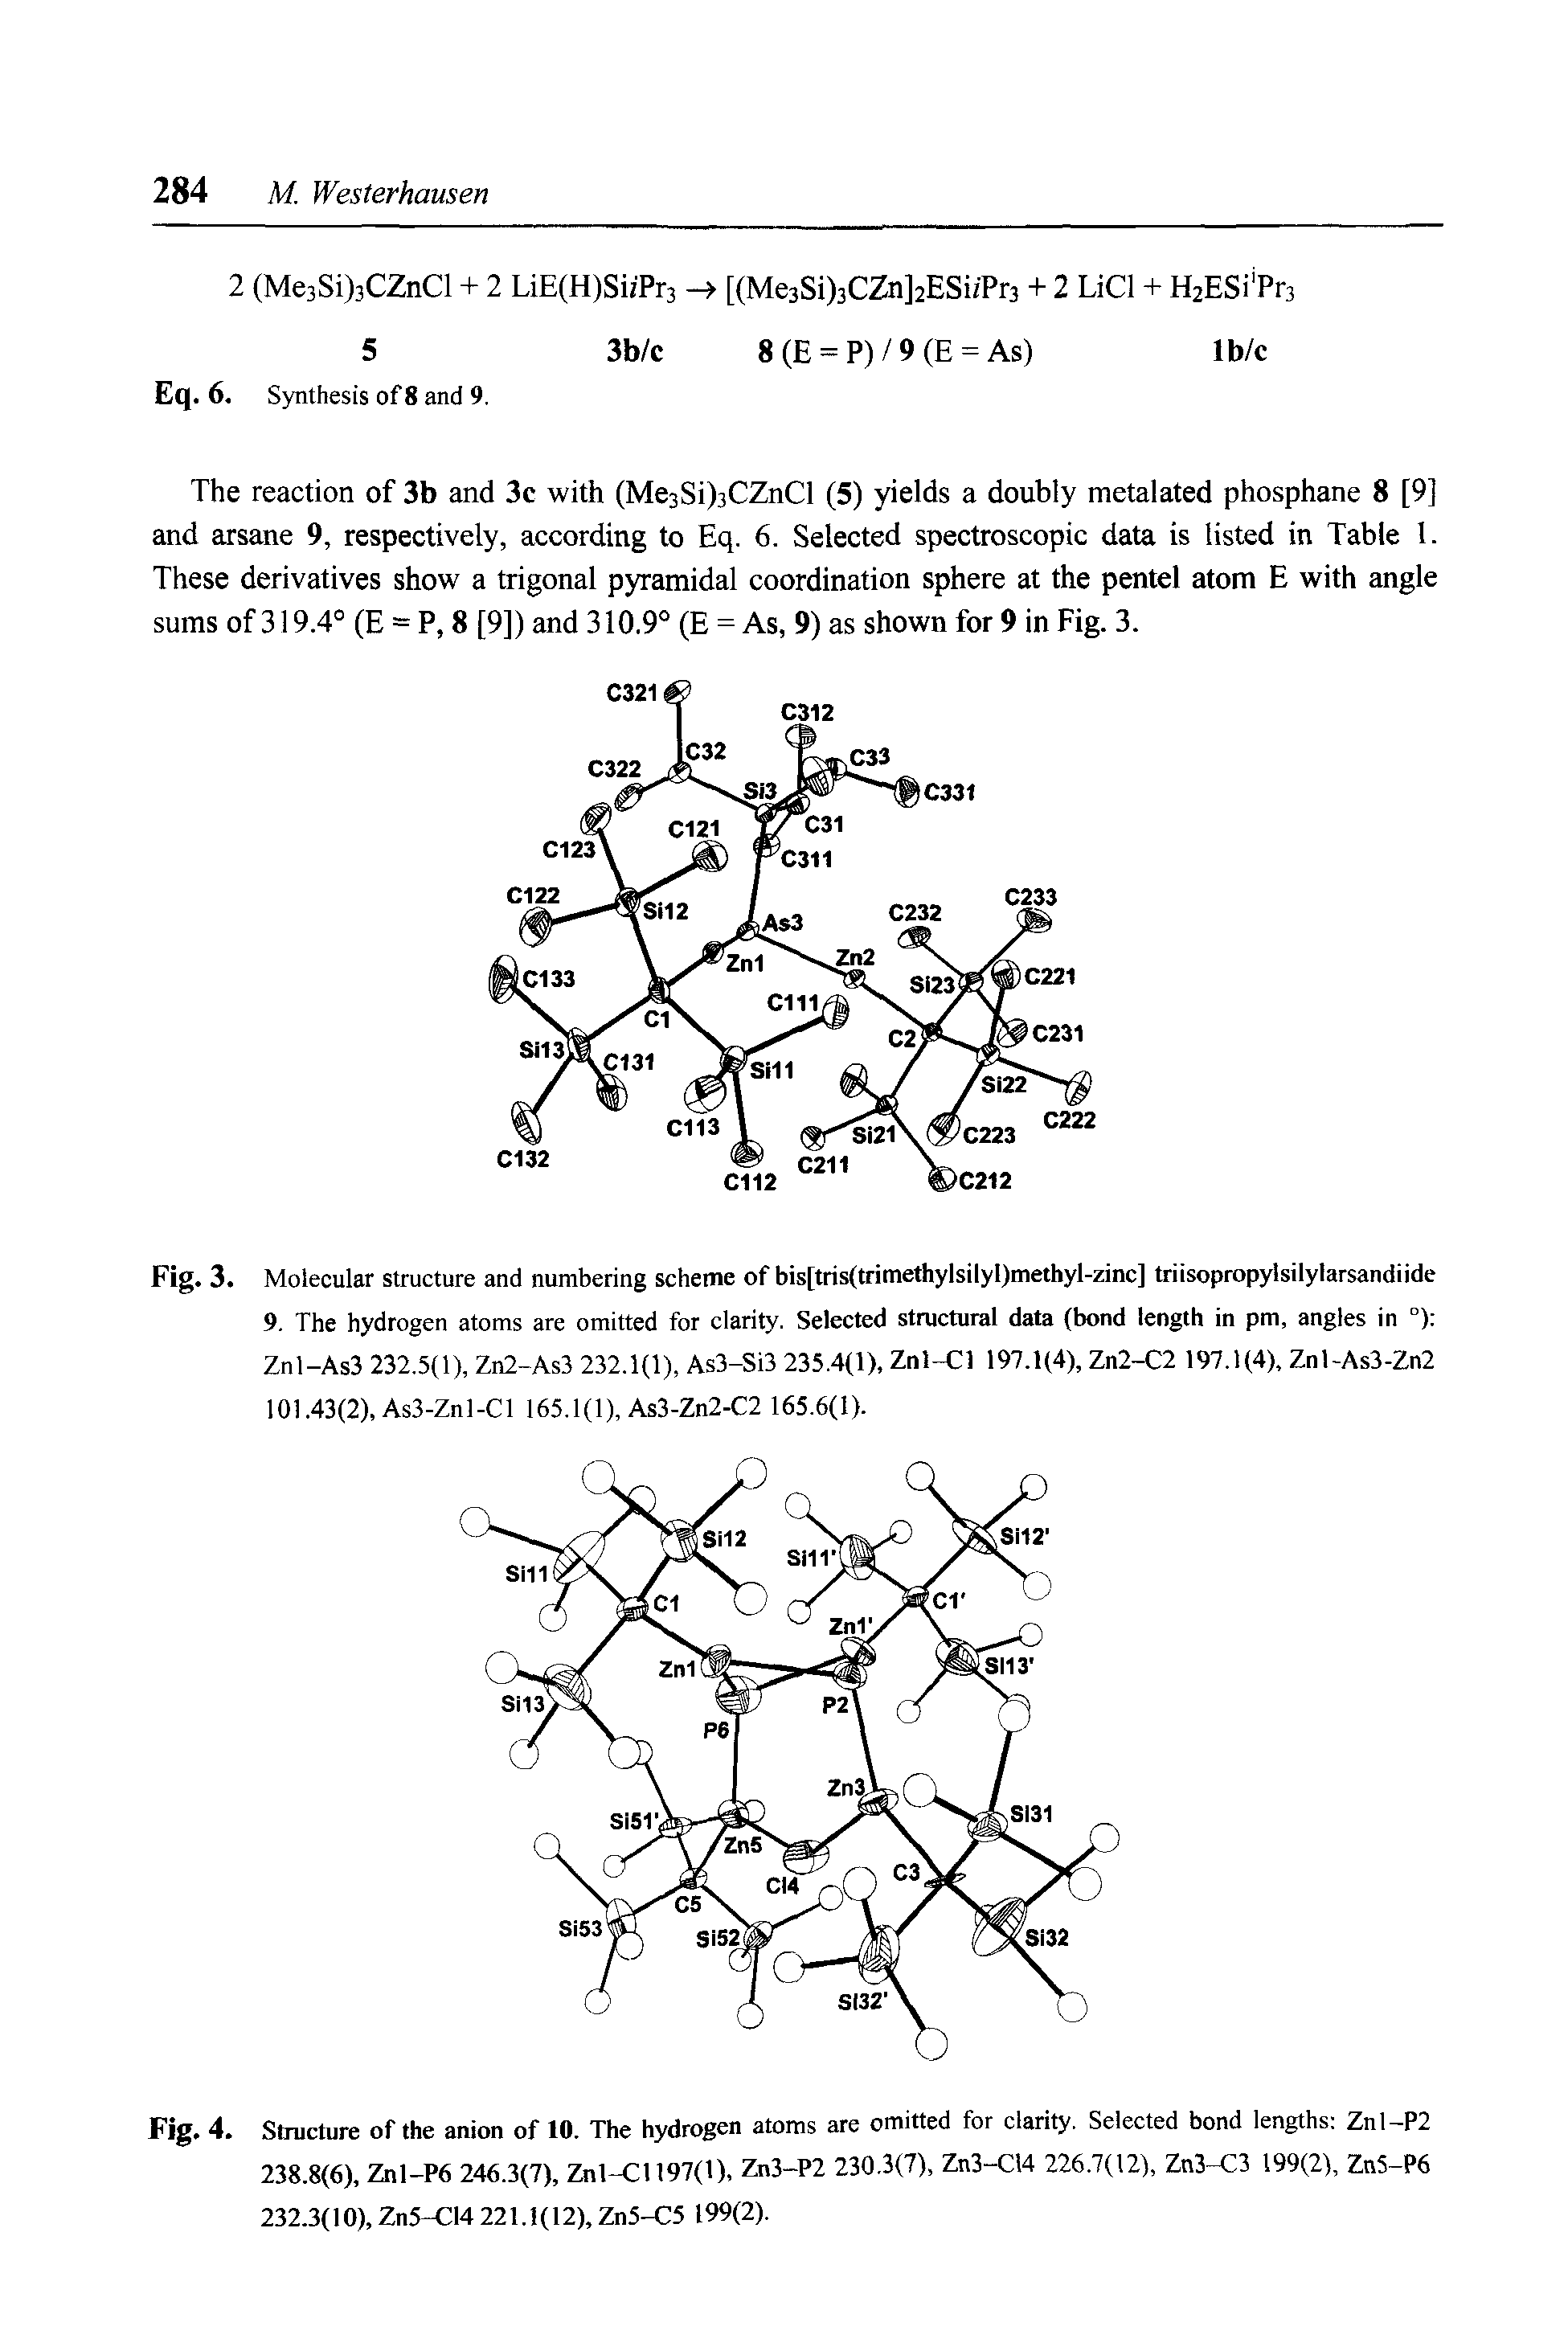 Fig. 3. Molecular structure and numbering scheme of bis[tris(trimethylsilyl)methyl-zinc] triisopropydsilylarsandiide 9. The hydrogen atoms are omitted for clarity. Selected structural data (bond length in pm, angles in °) Znl-As3 232.5(1), Zn2-As3 232.1(1), As3-Si3 235.4(1), Znl-Cl 197.1(4), Zn2-C2 197.1(4), Znl-As3-Zn2 101.43(2), As3-Znl-Cl 165.1(1), As3-Zn2-C2 165.6(1).